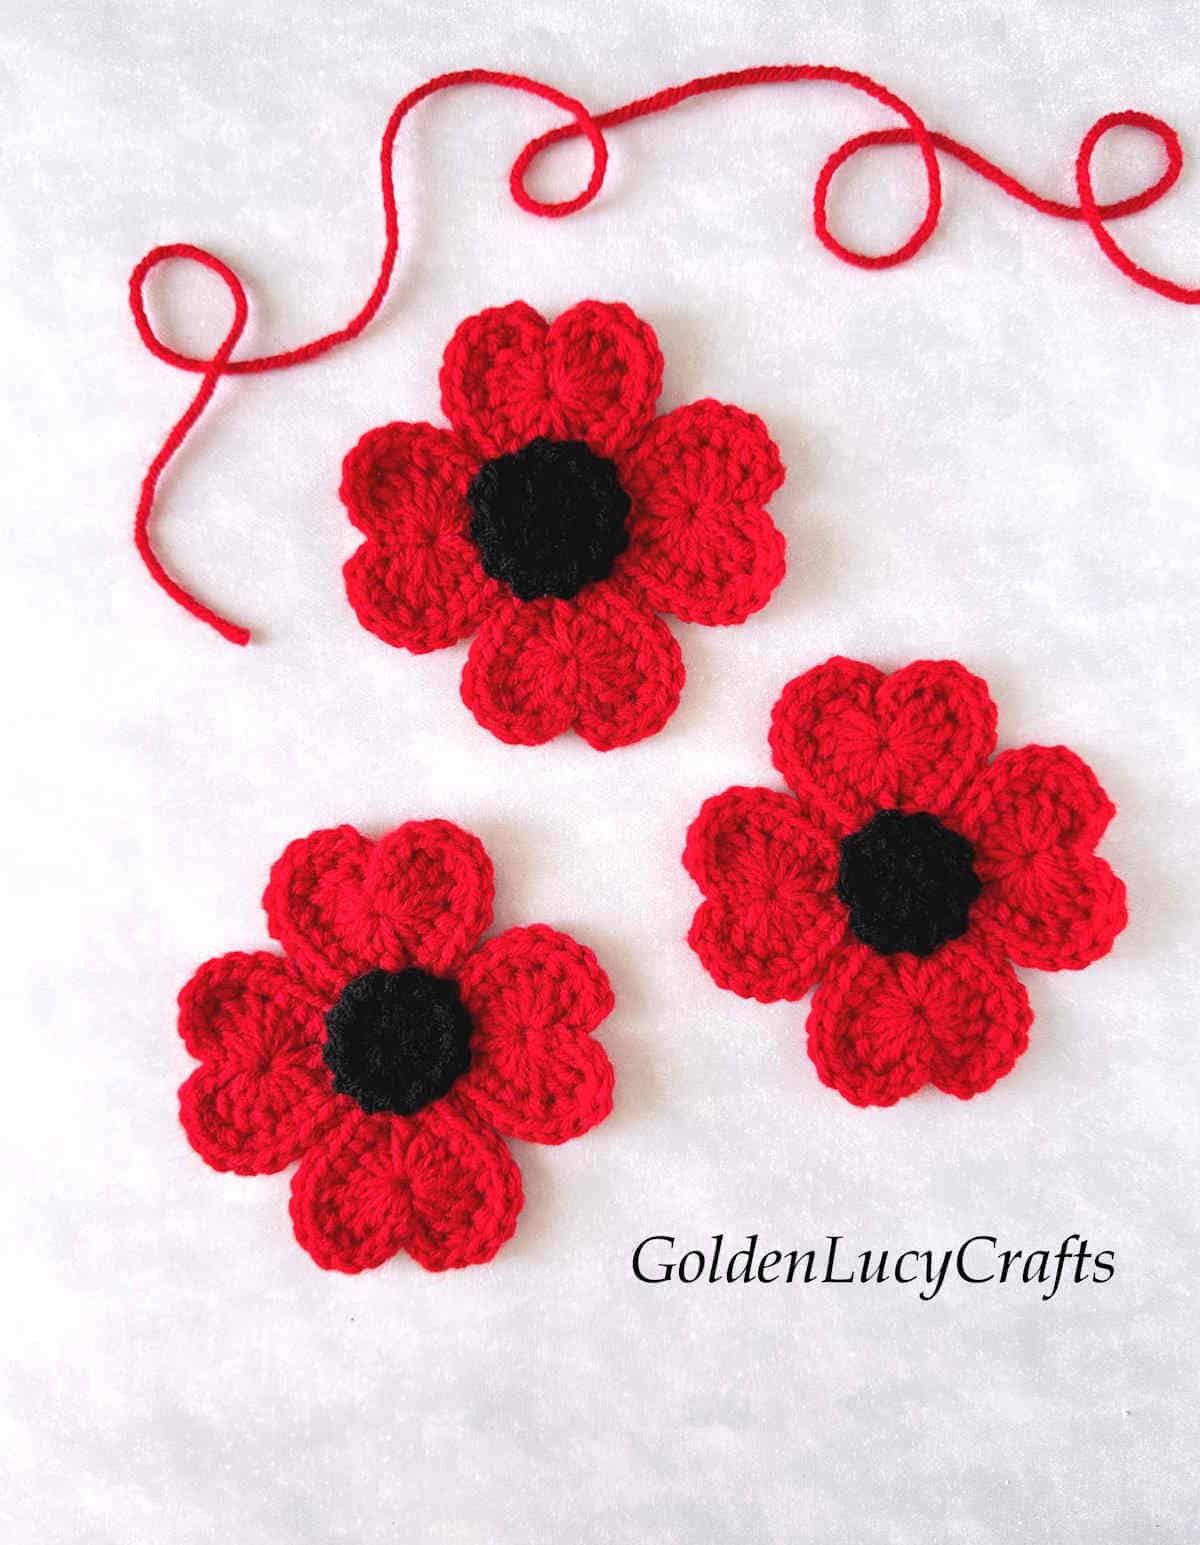 Three crocheted red poppies made from hearts.